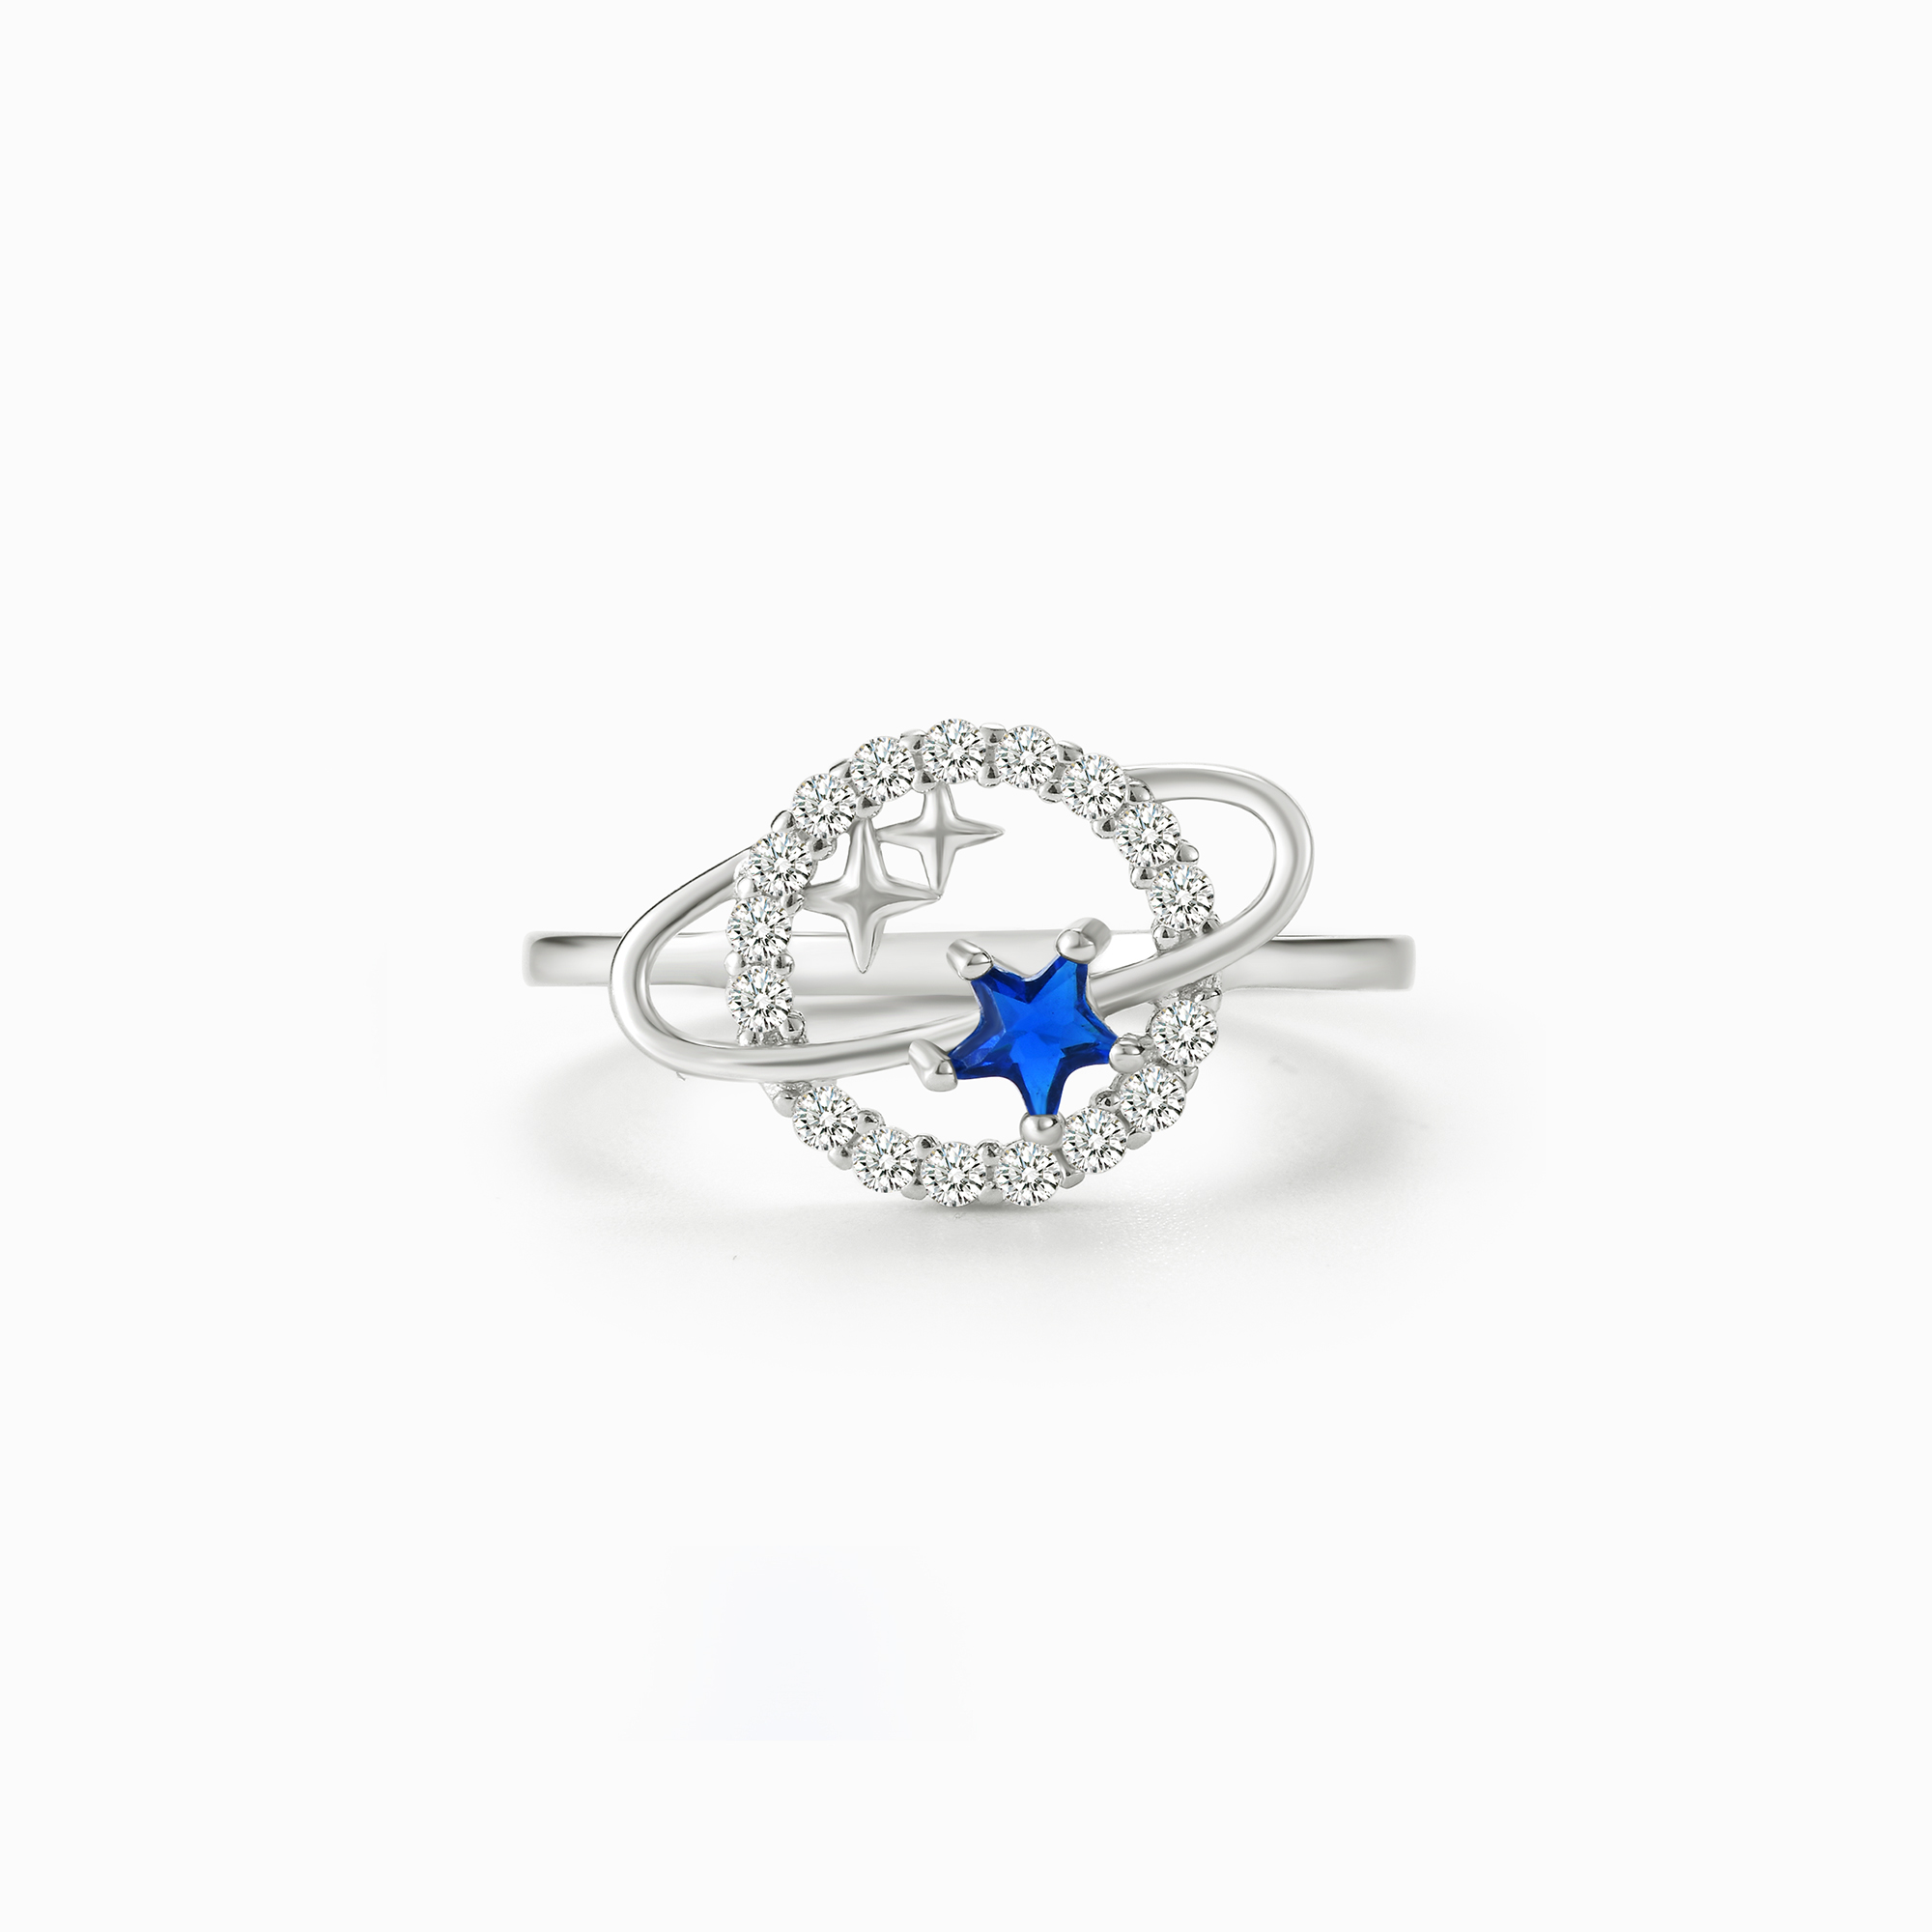 Most Special Star Ring